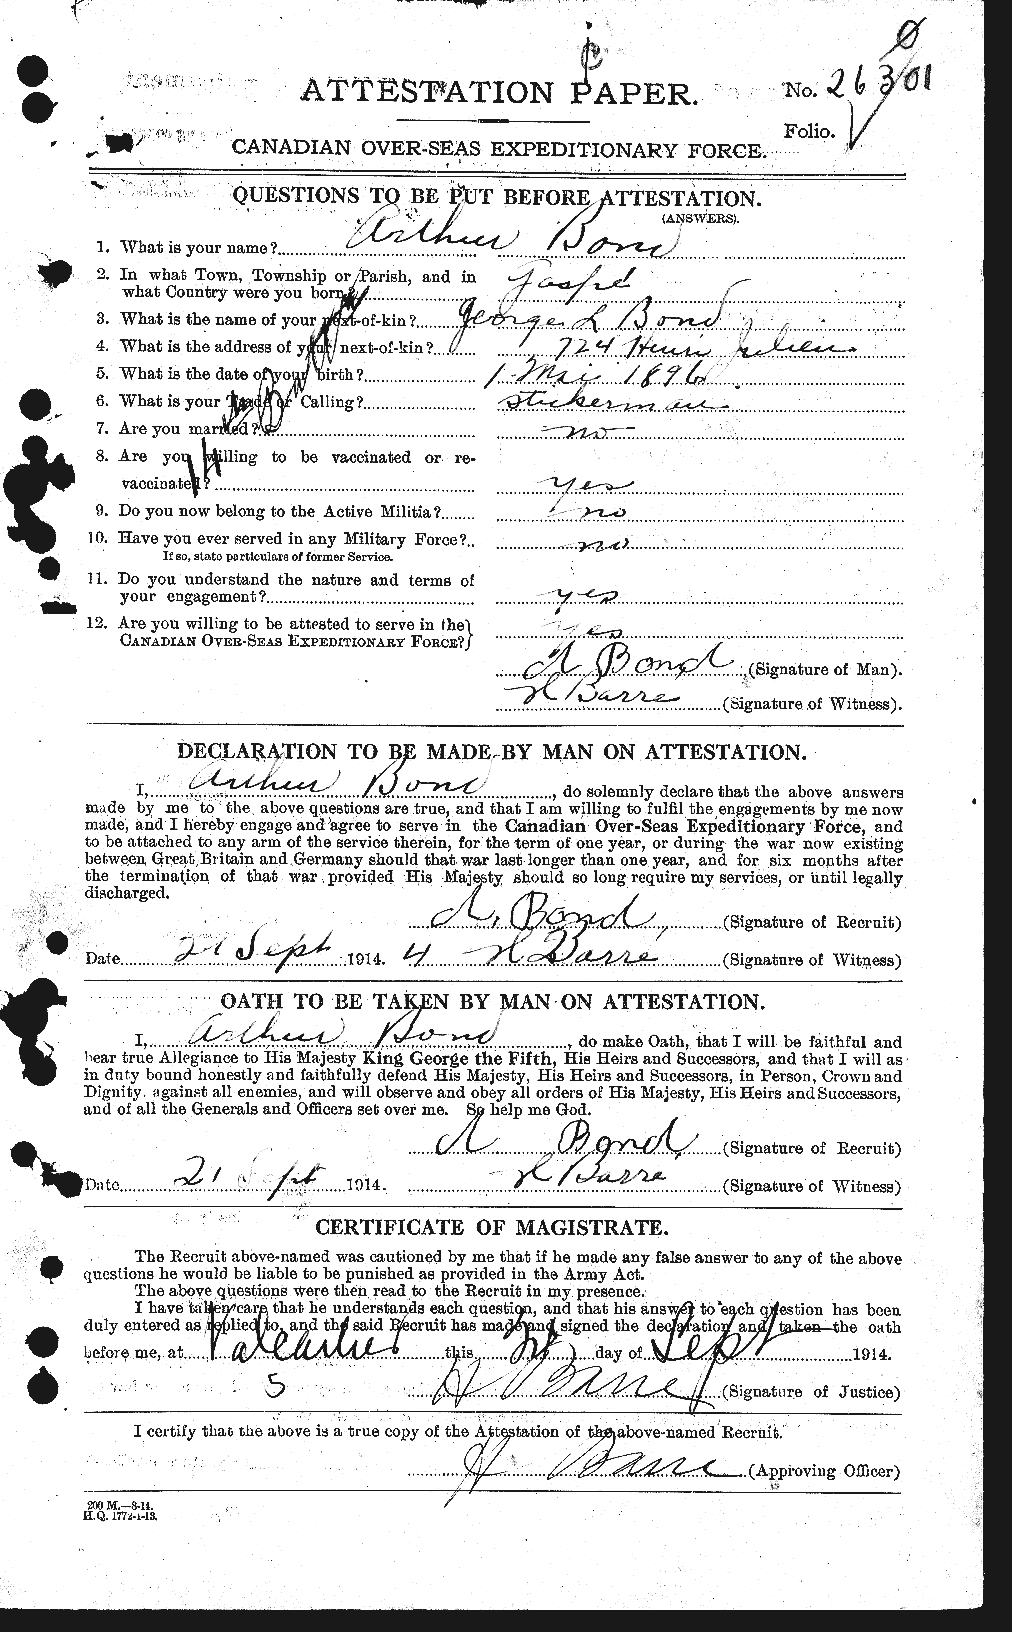 Personnel Records of the First World War - CEF 250253a